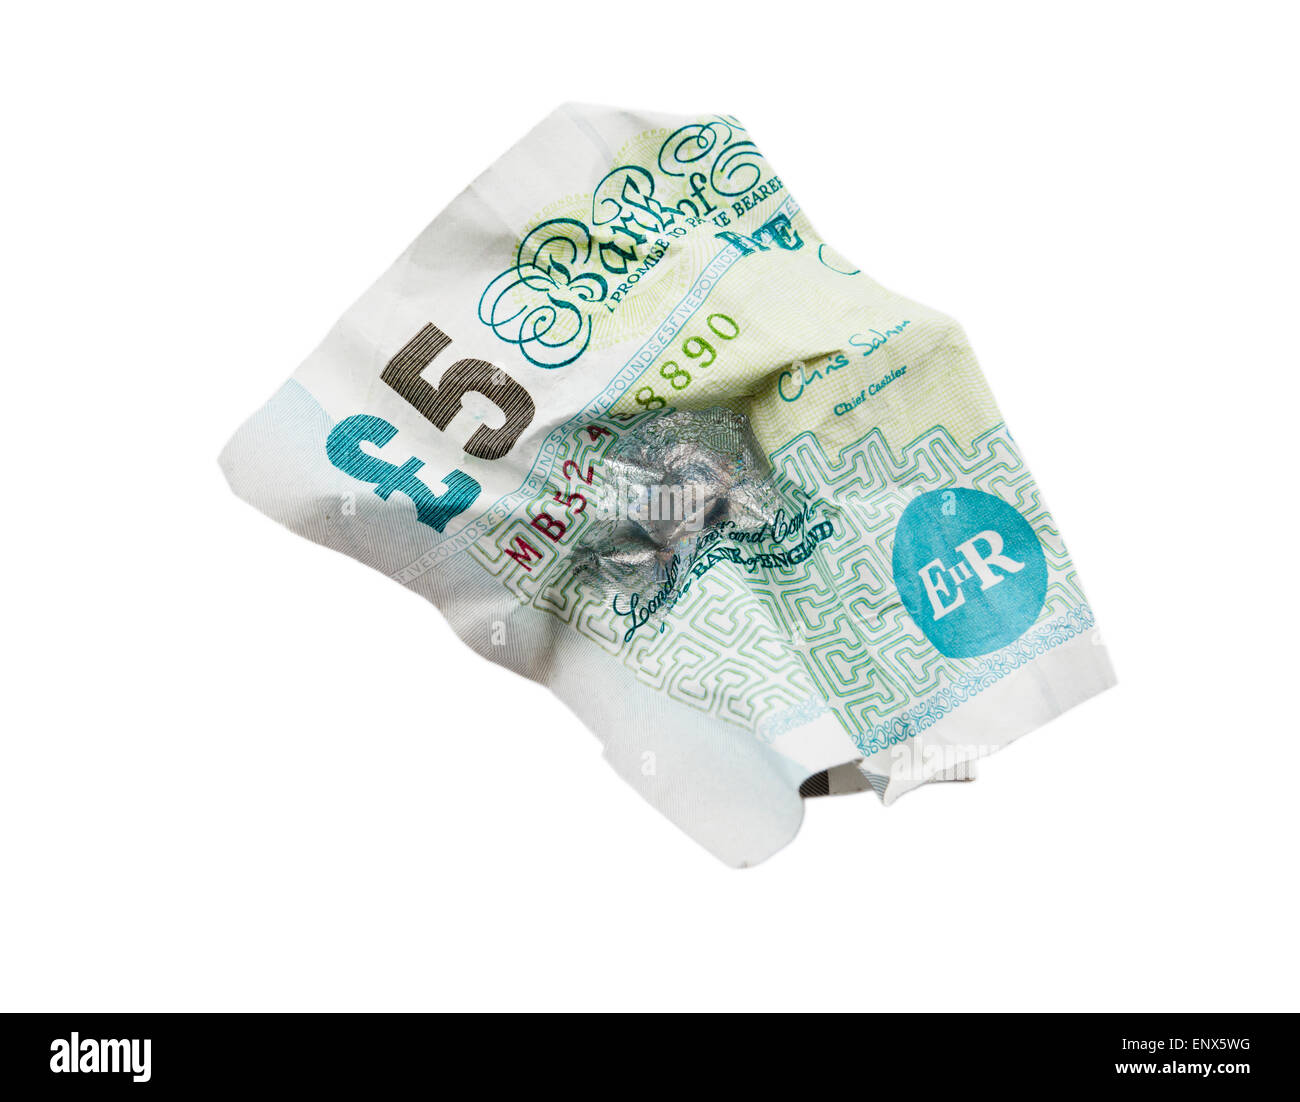 https://c8.alamy.com/comp/ENX5WG/british-sterling-old-paper-five-pound-note-crumpled-and-screwed-up-ENX5WG.jpg